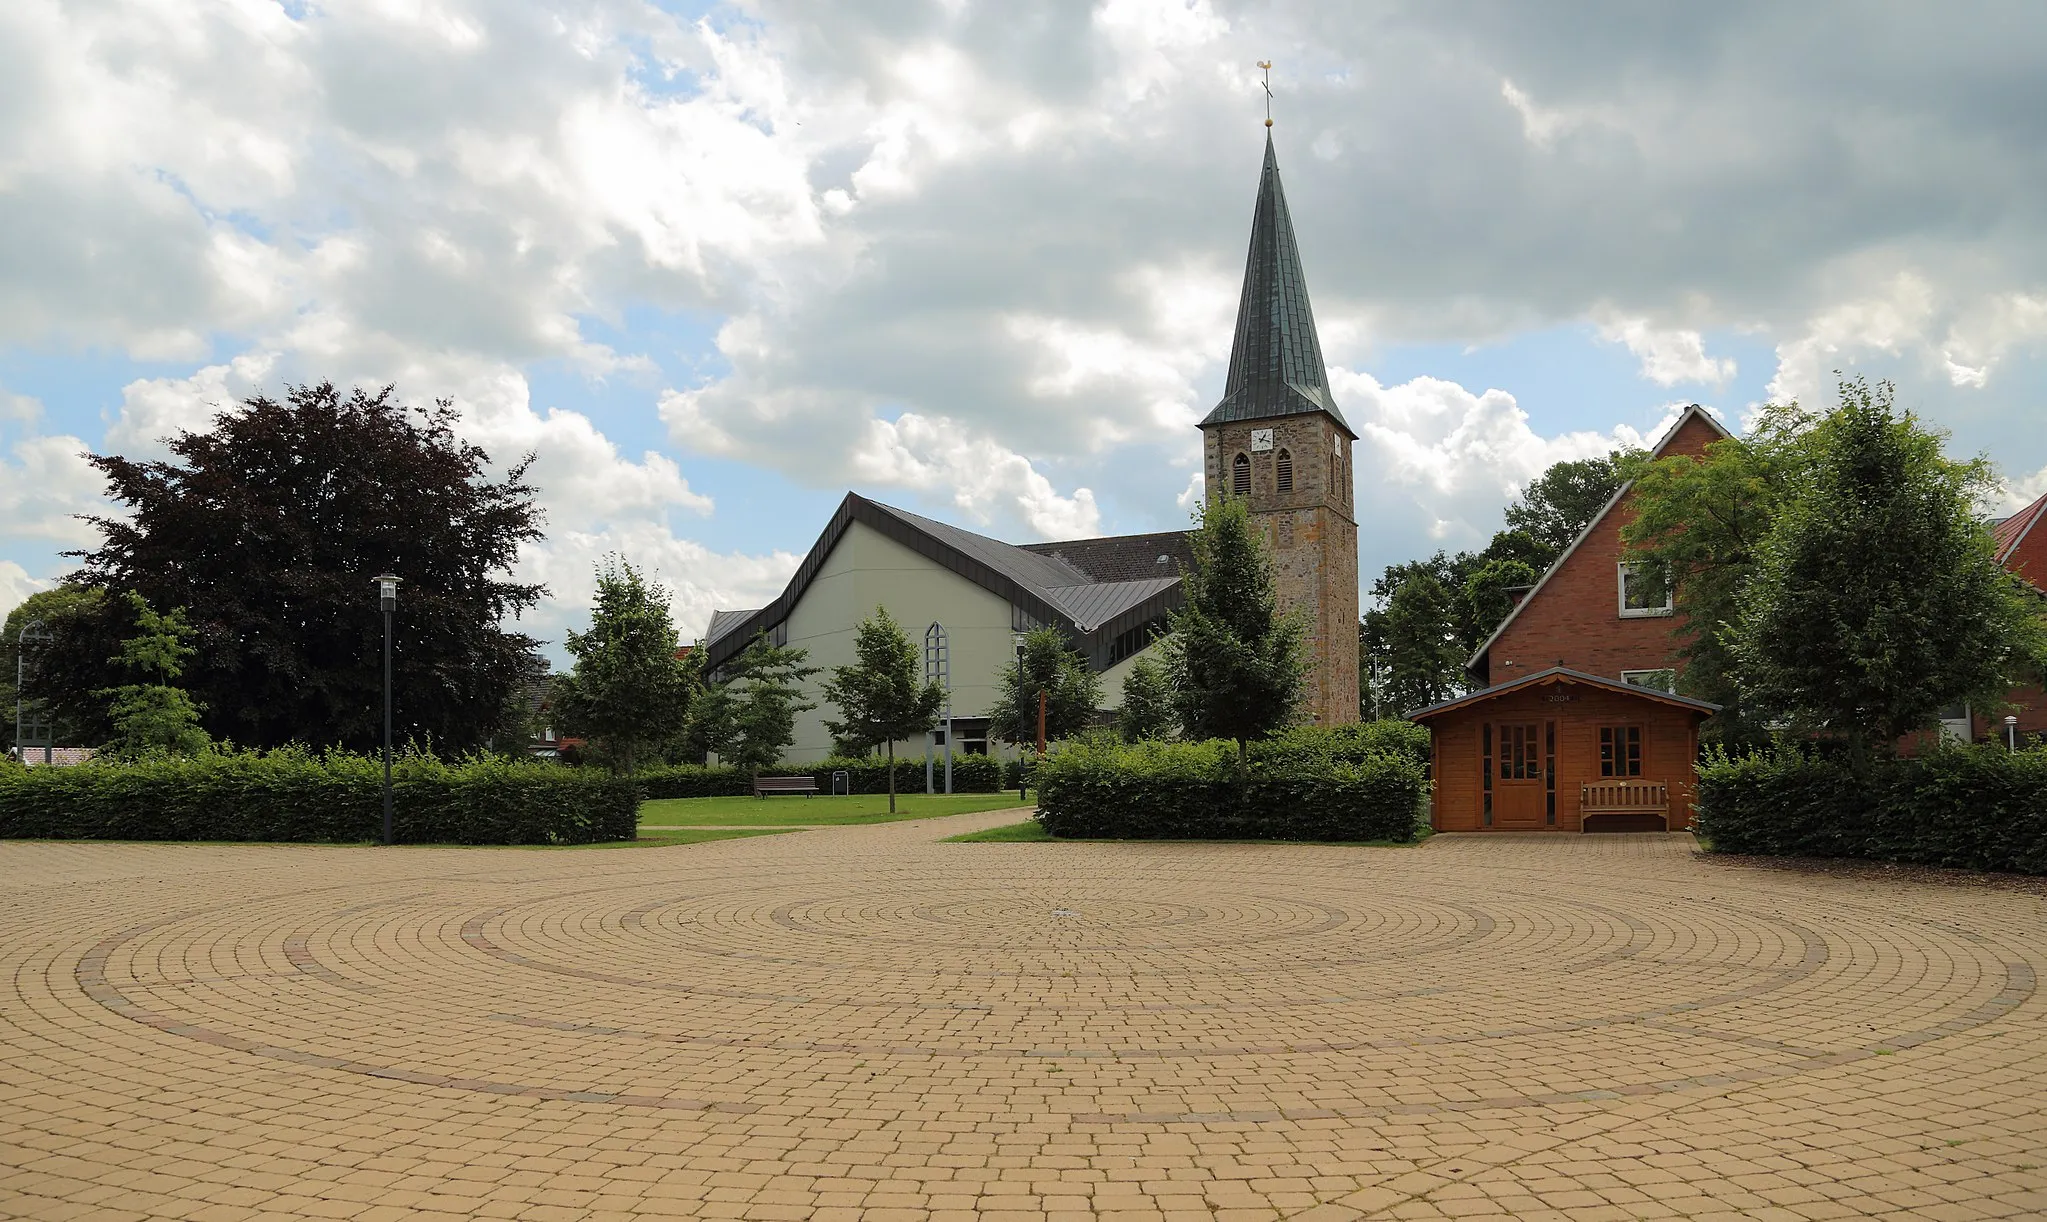 Photo showing: So called „Ecumenism Midst“ (Ökumenische Mitte) in Baccum, a city district of Lingen (Ems), Landkreis Emsland, Lower Saxony, Germany. The square is situated between the Reformed Church and the Roman Catholic St. Antonius Church.